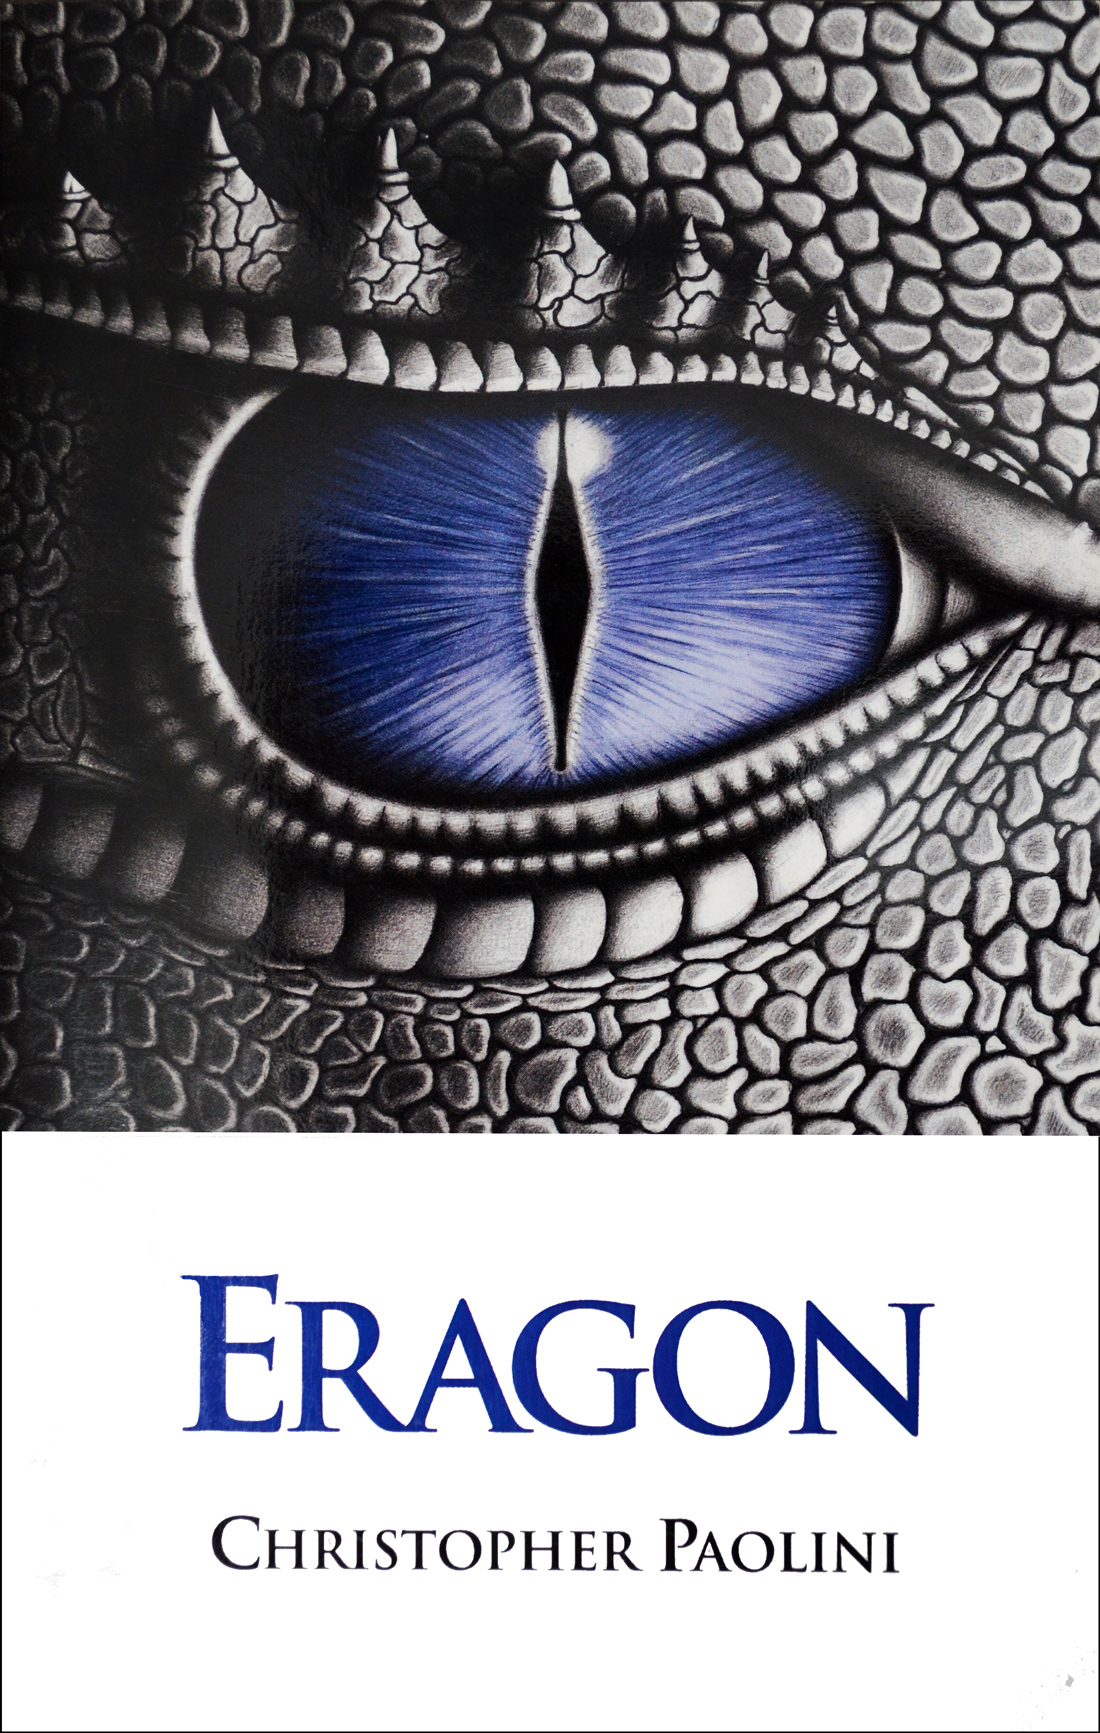 The Self-Published Edition of Eragon